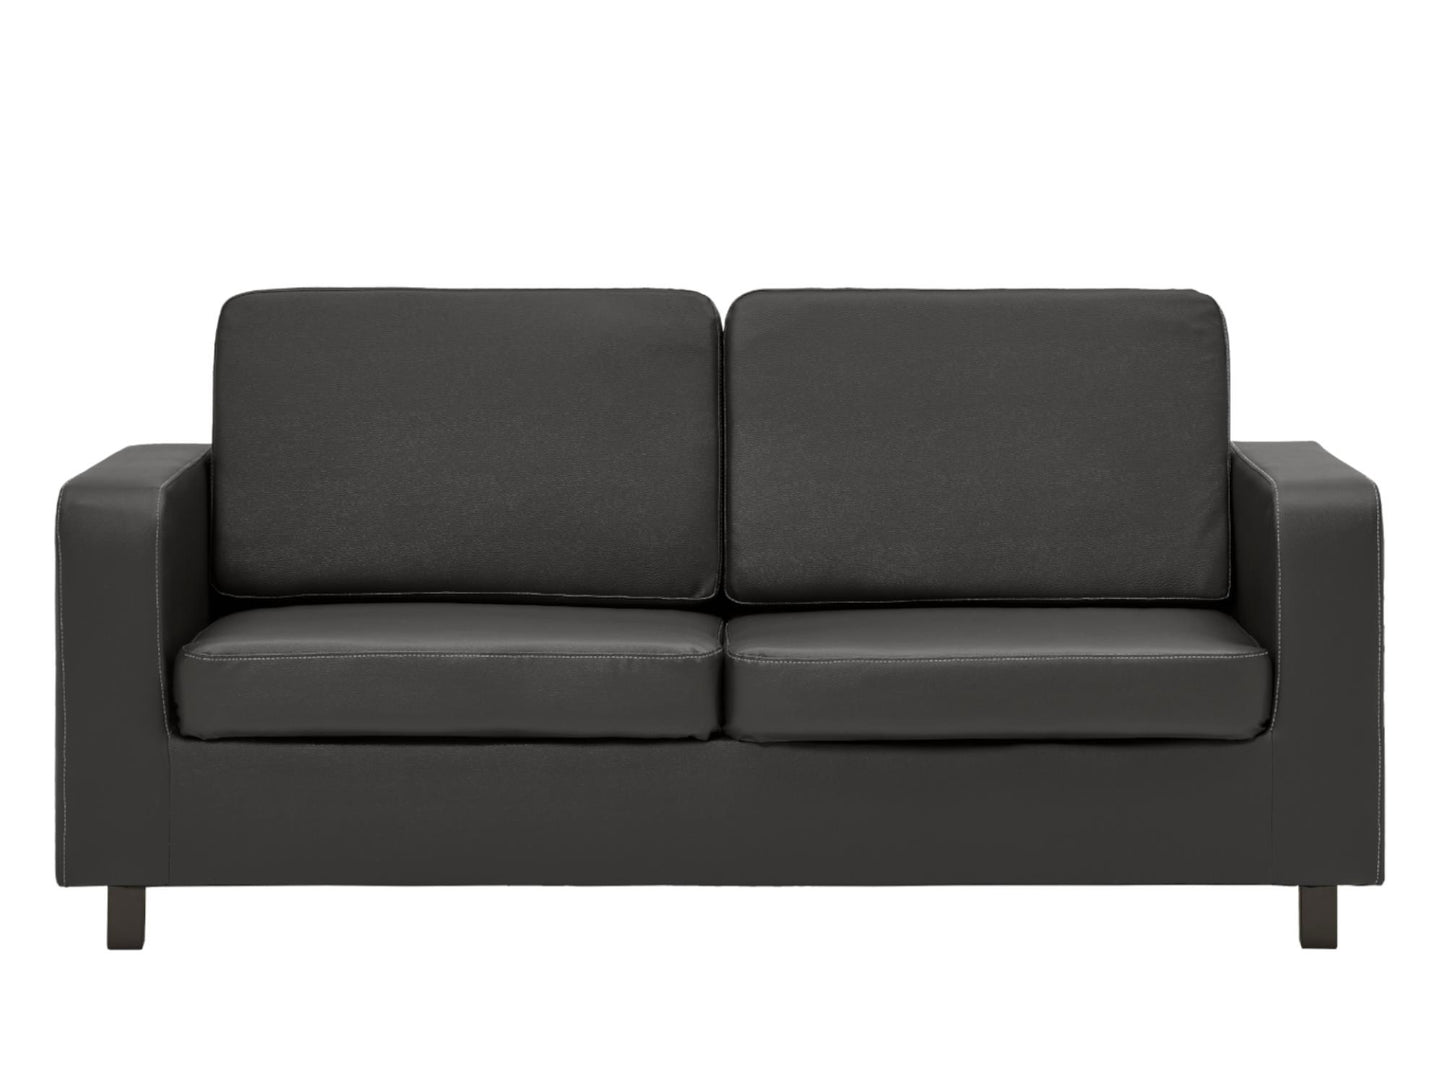 Lacey Sofa in Black Faux Leather